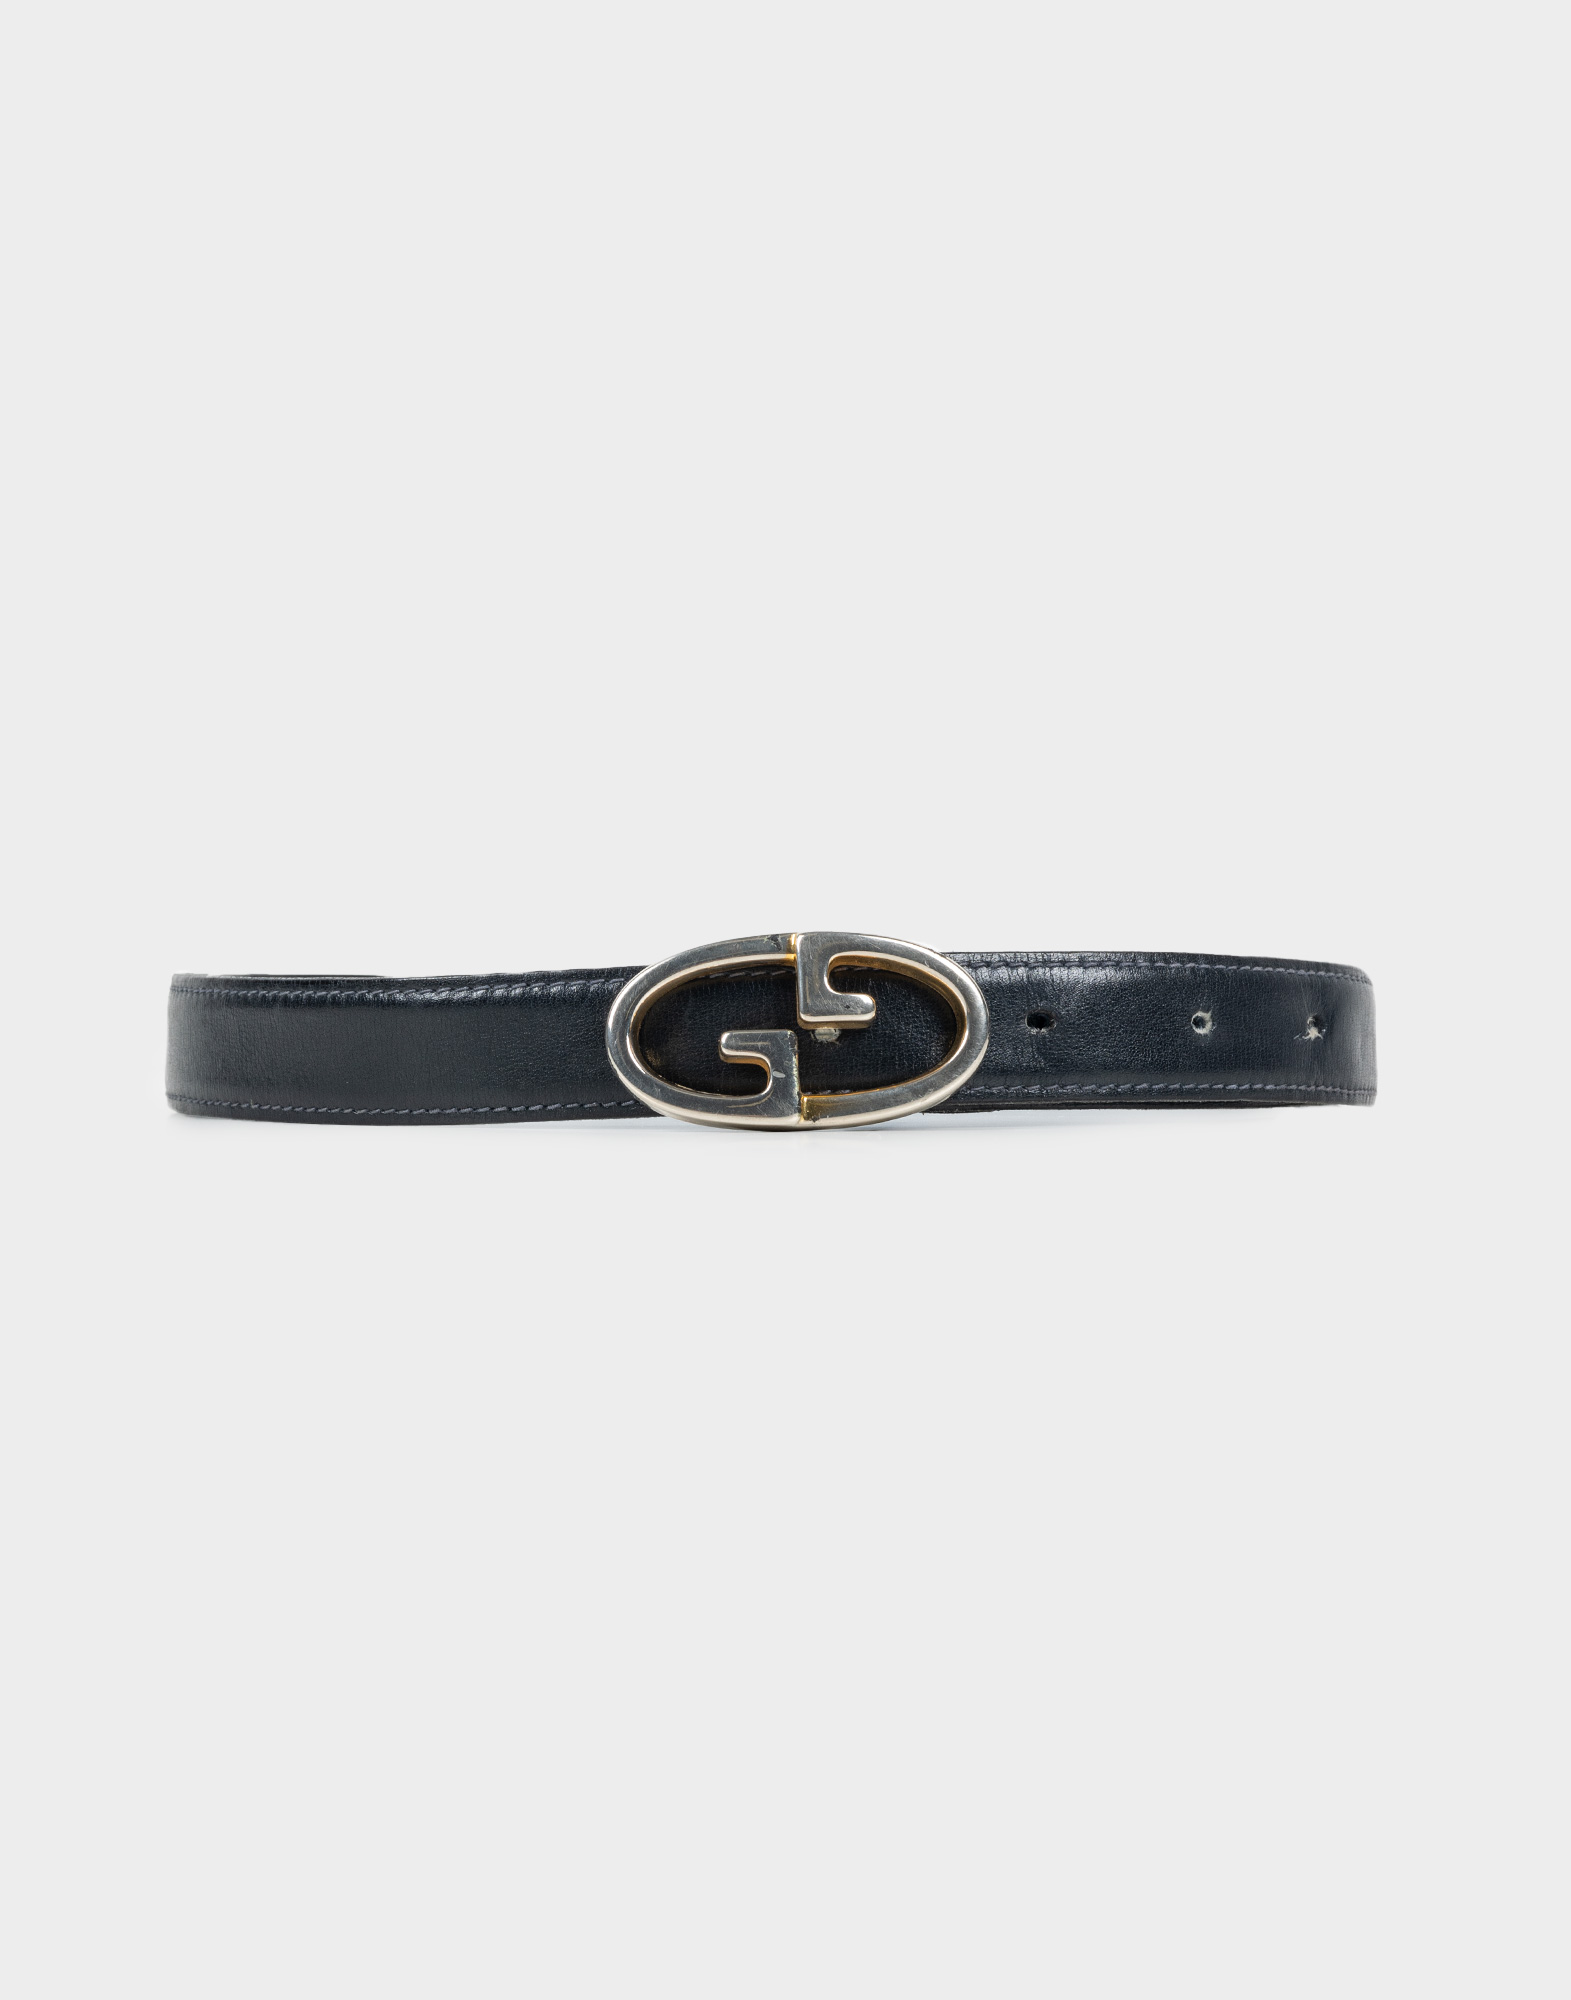 women's thin blue leather belt,silver buckle with double G